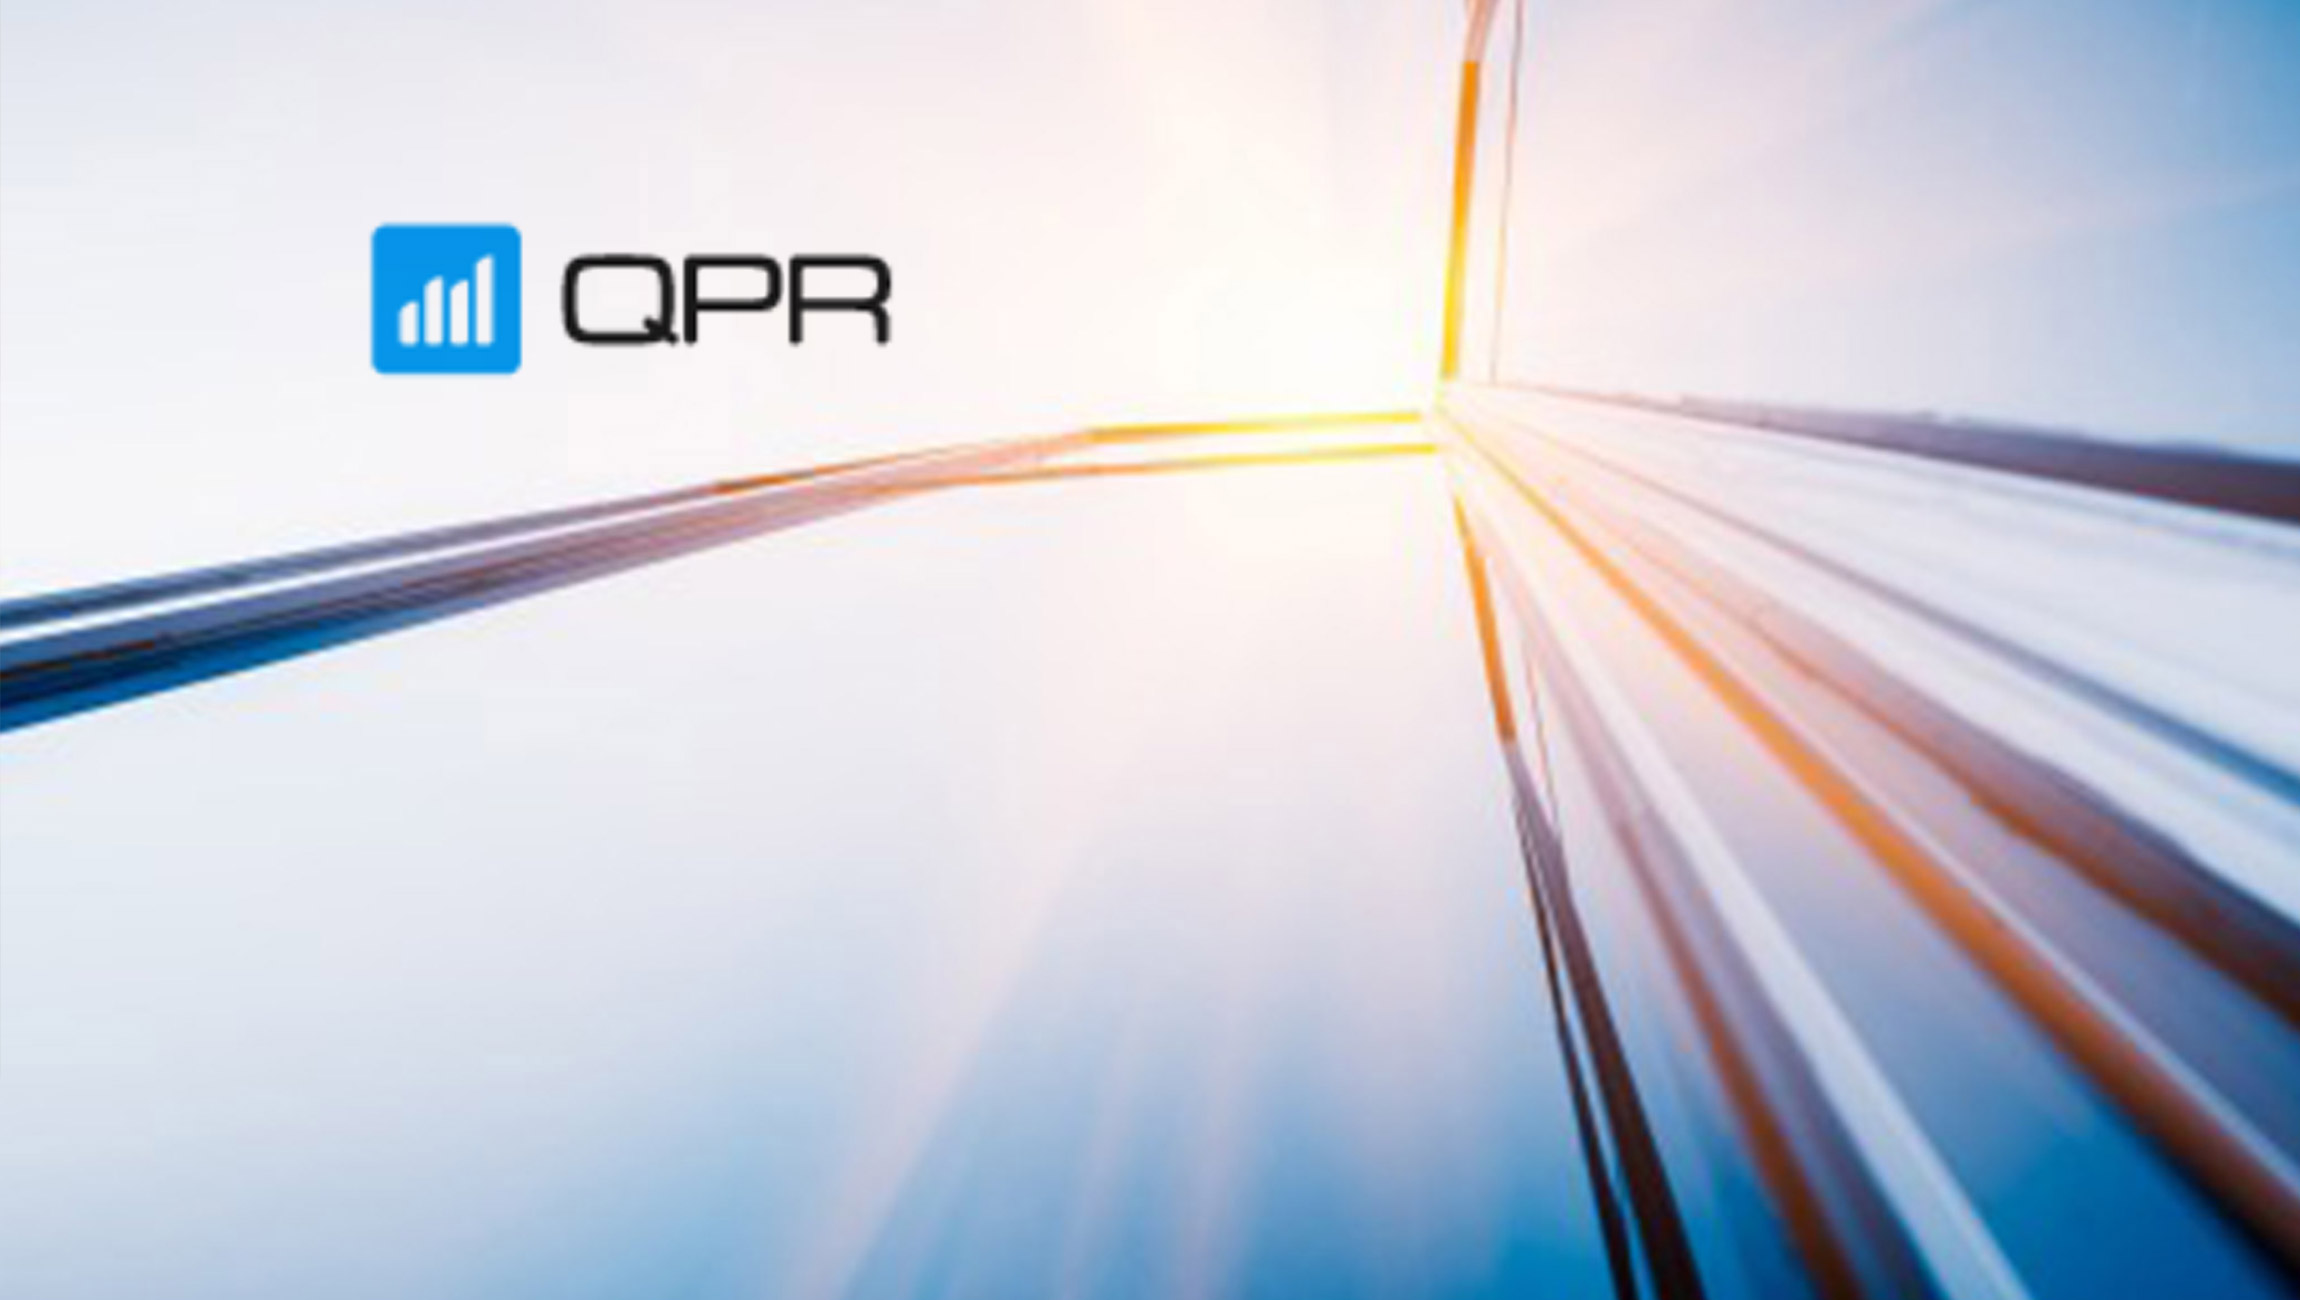 QPR Software brings a revolutionary solution for process mining Powered by Snowflake